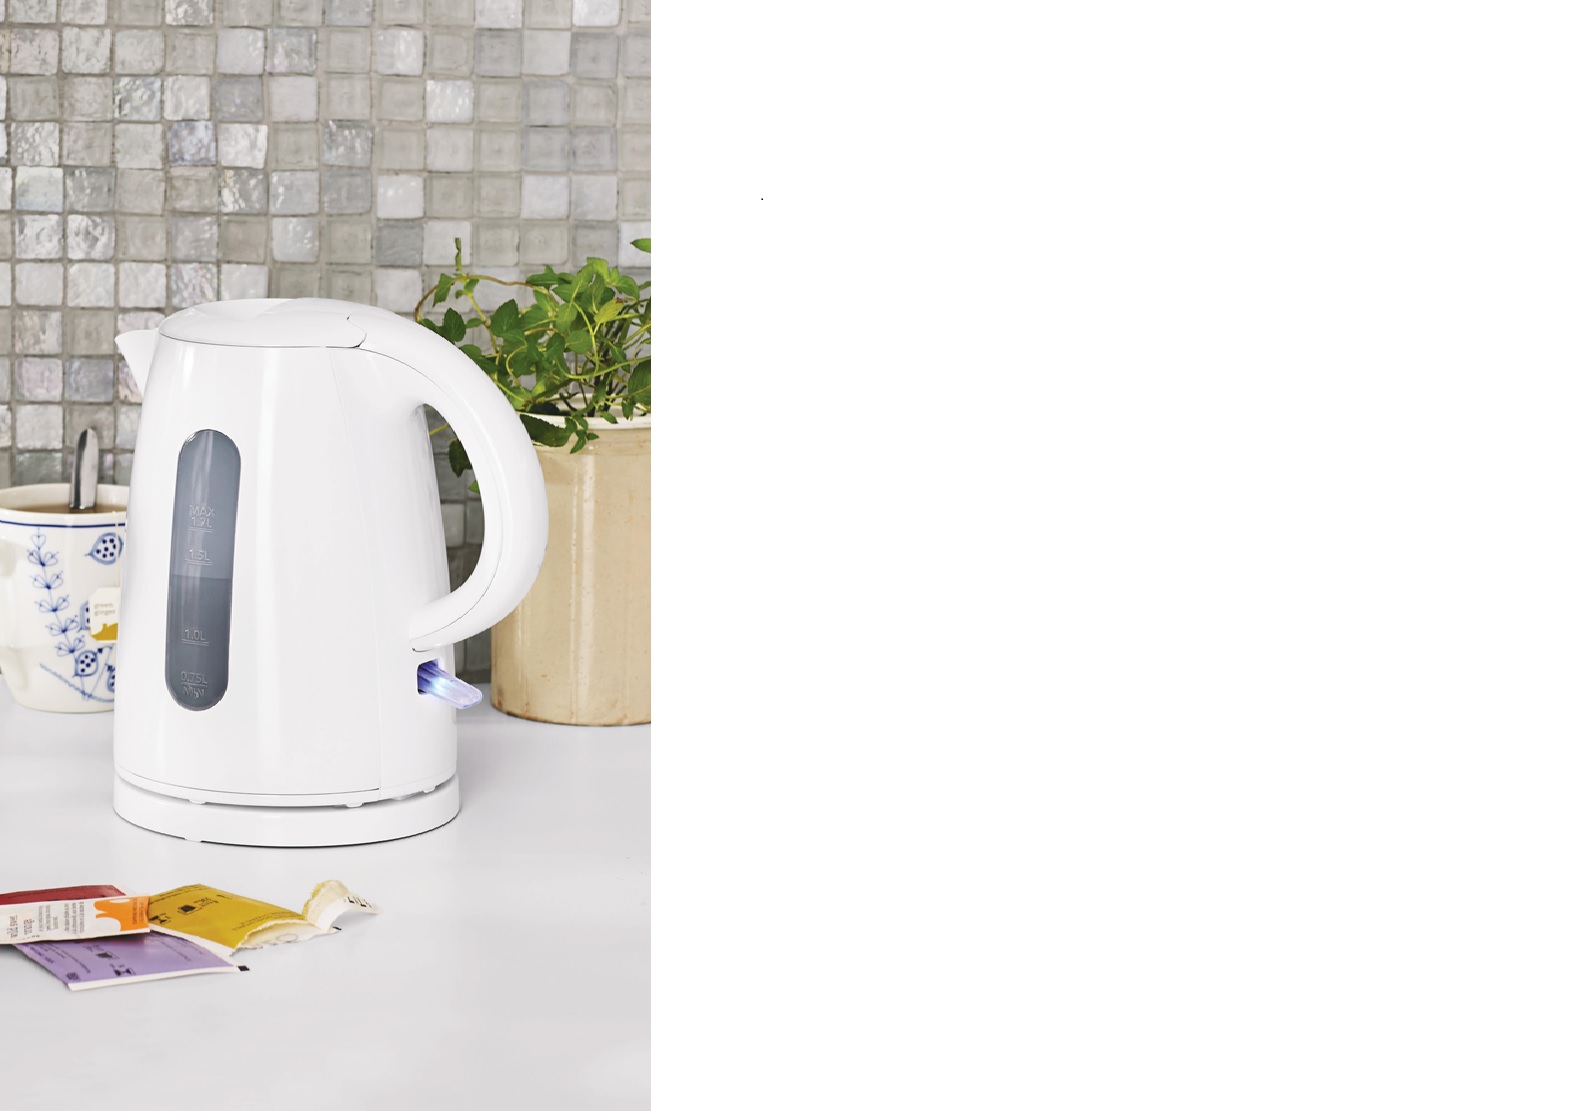 Mainstays 1.7 Liter Plastic Electric Kettle, White - image 5 of 6